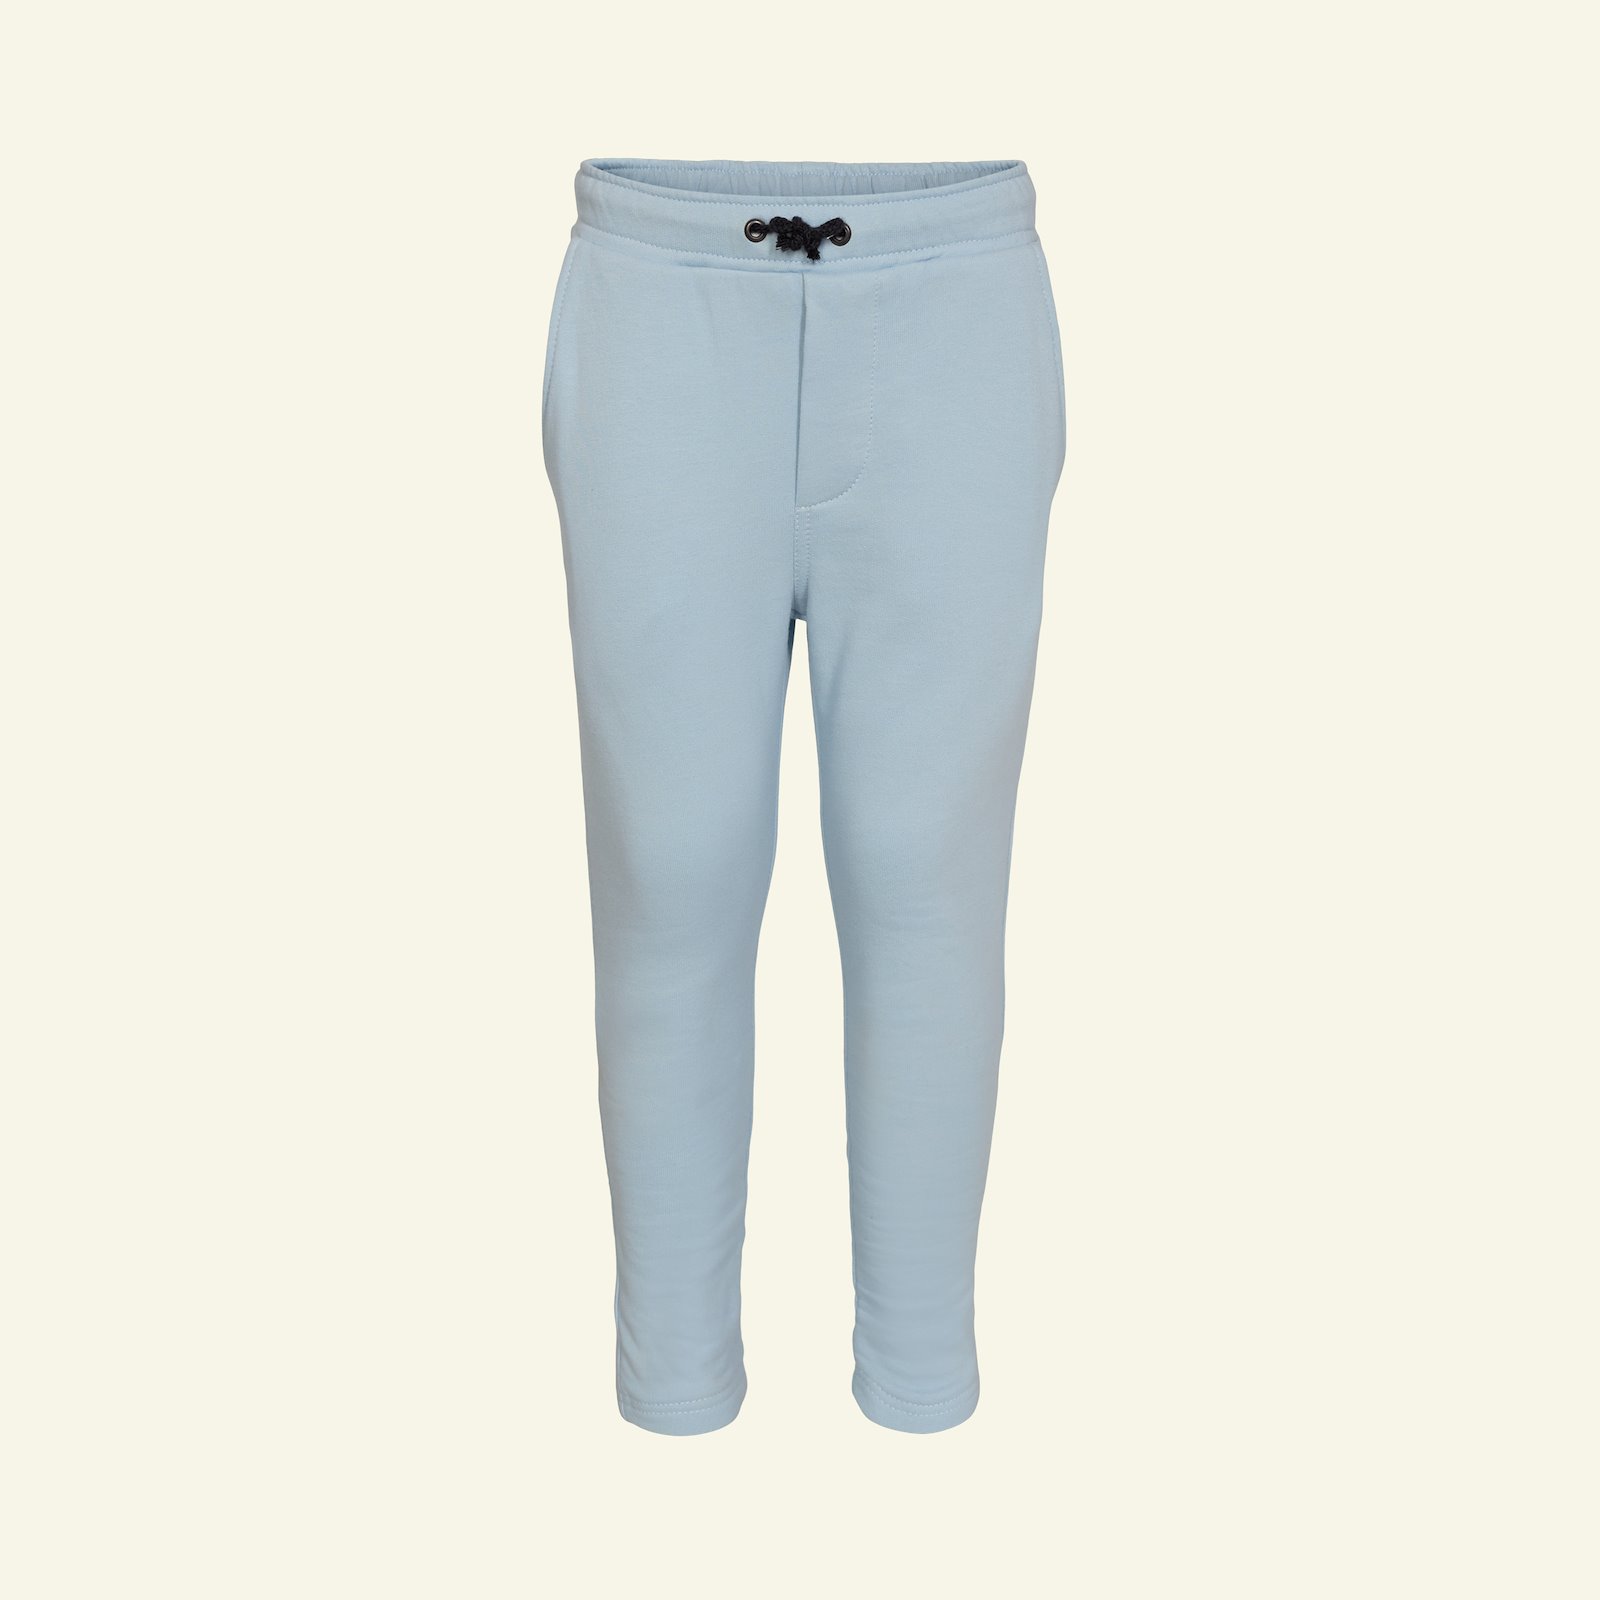 Trousers, 134/9y p60035_211777_sskit